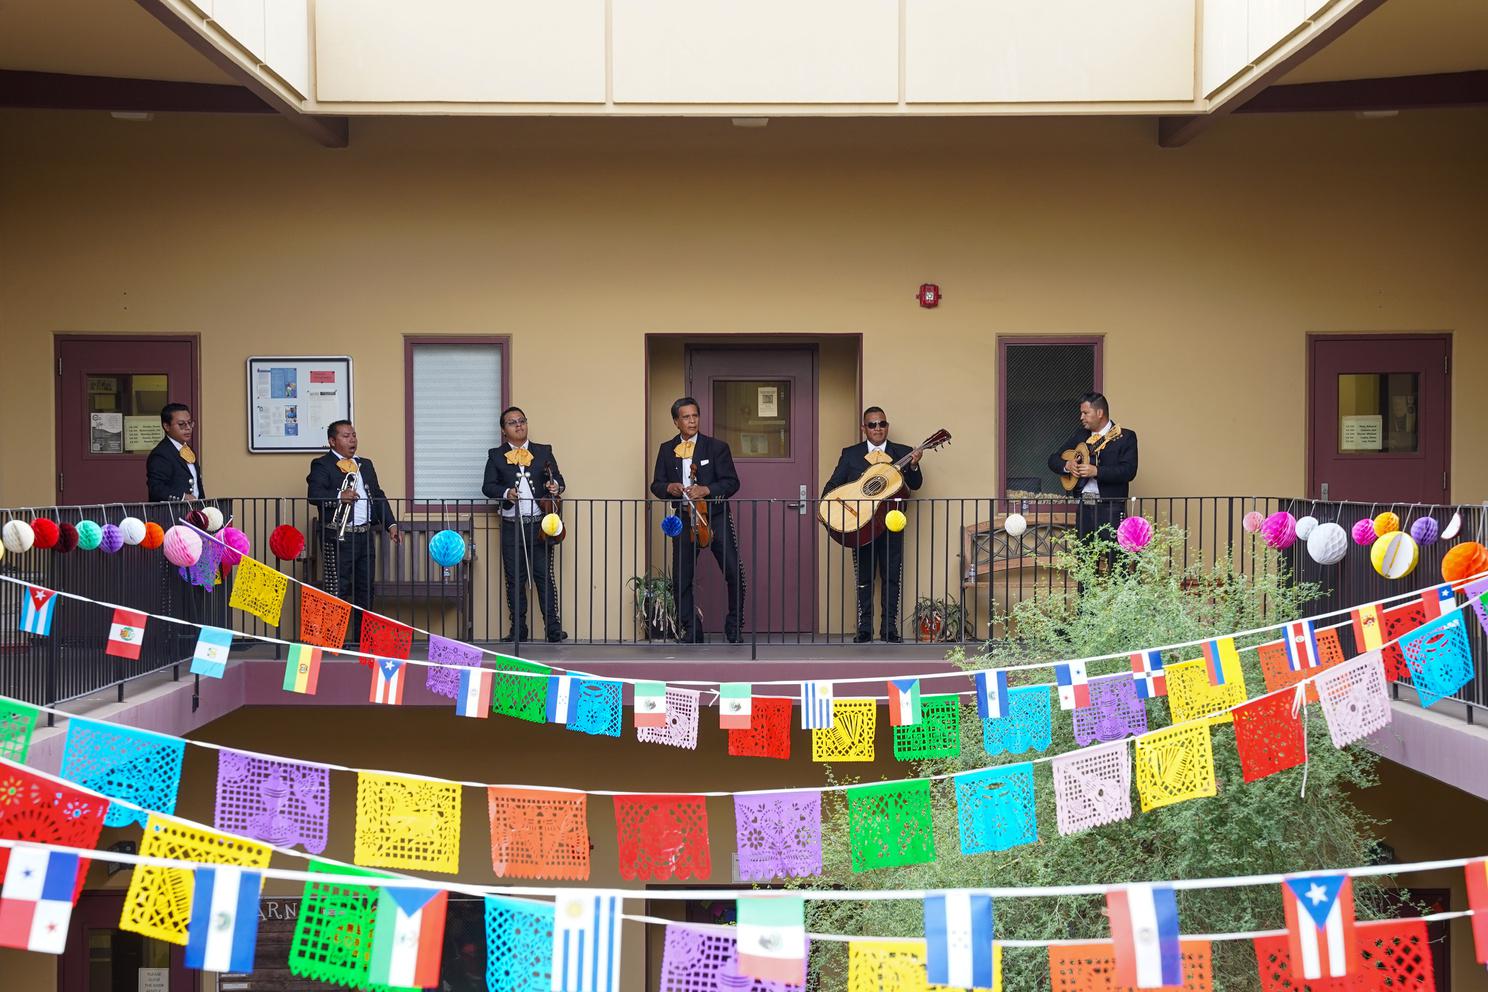 A Mariachi band playing above the LA Courtyard